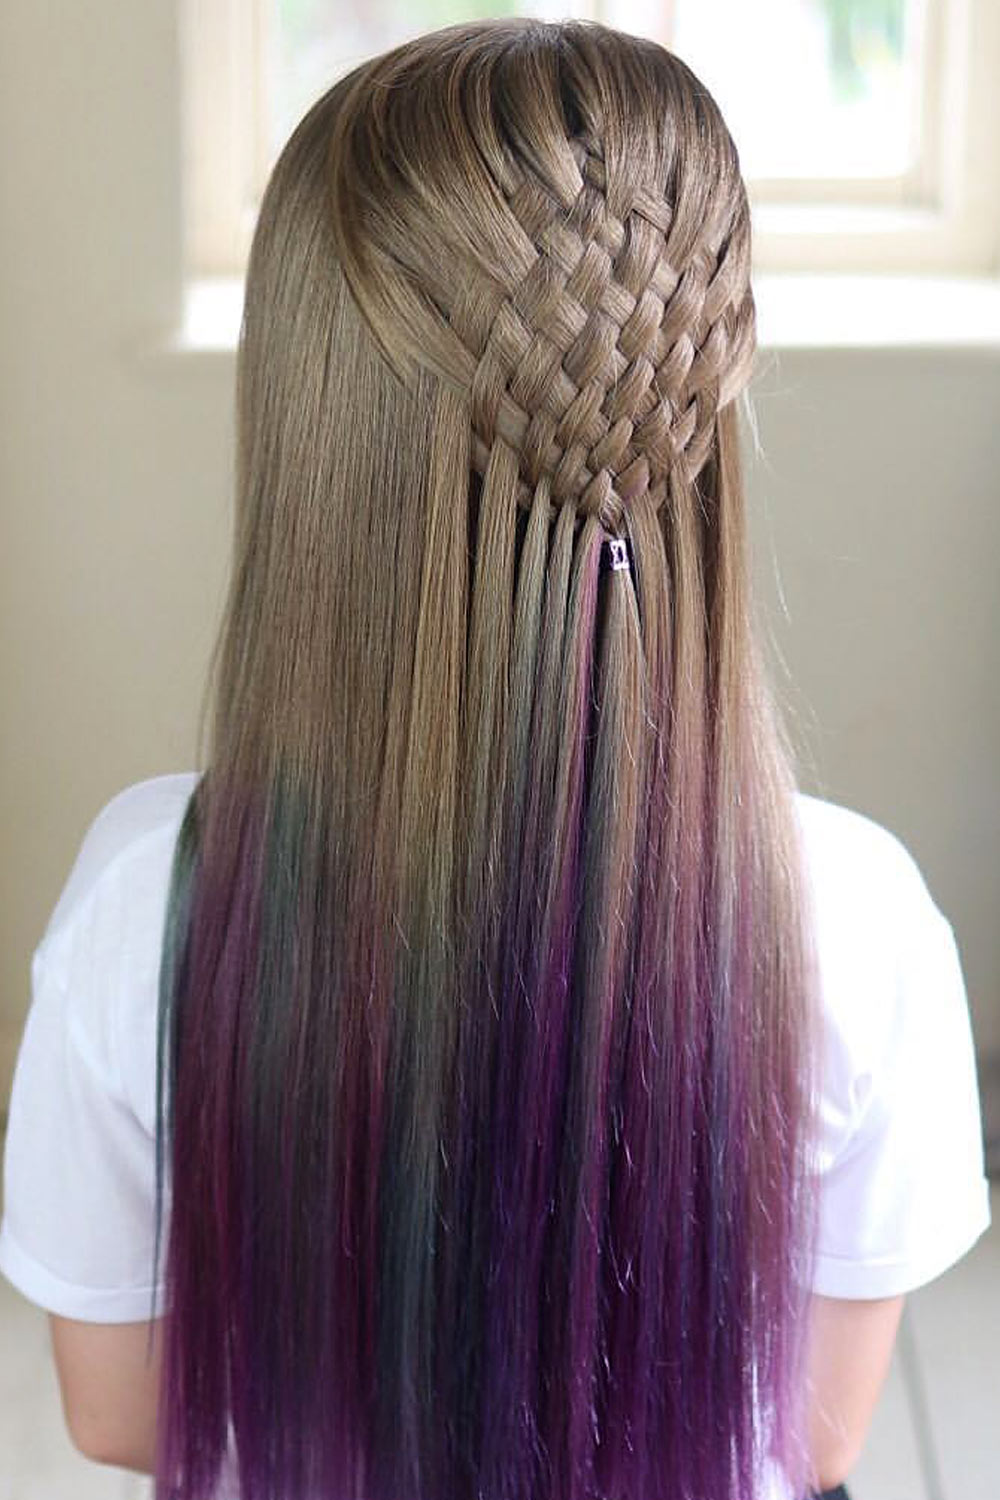 Just Add Some Colorful Ombre to Your Halloween Style